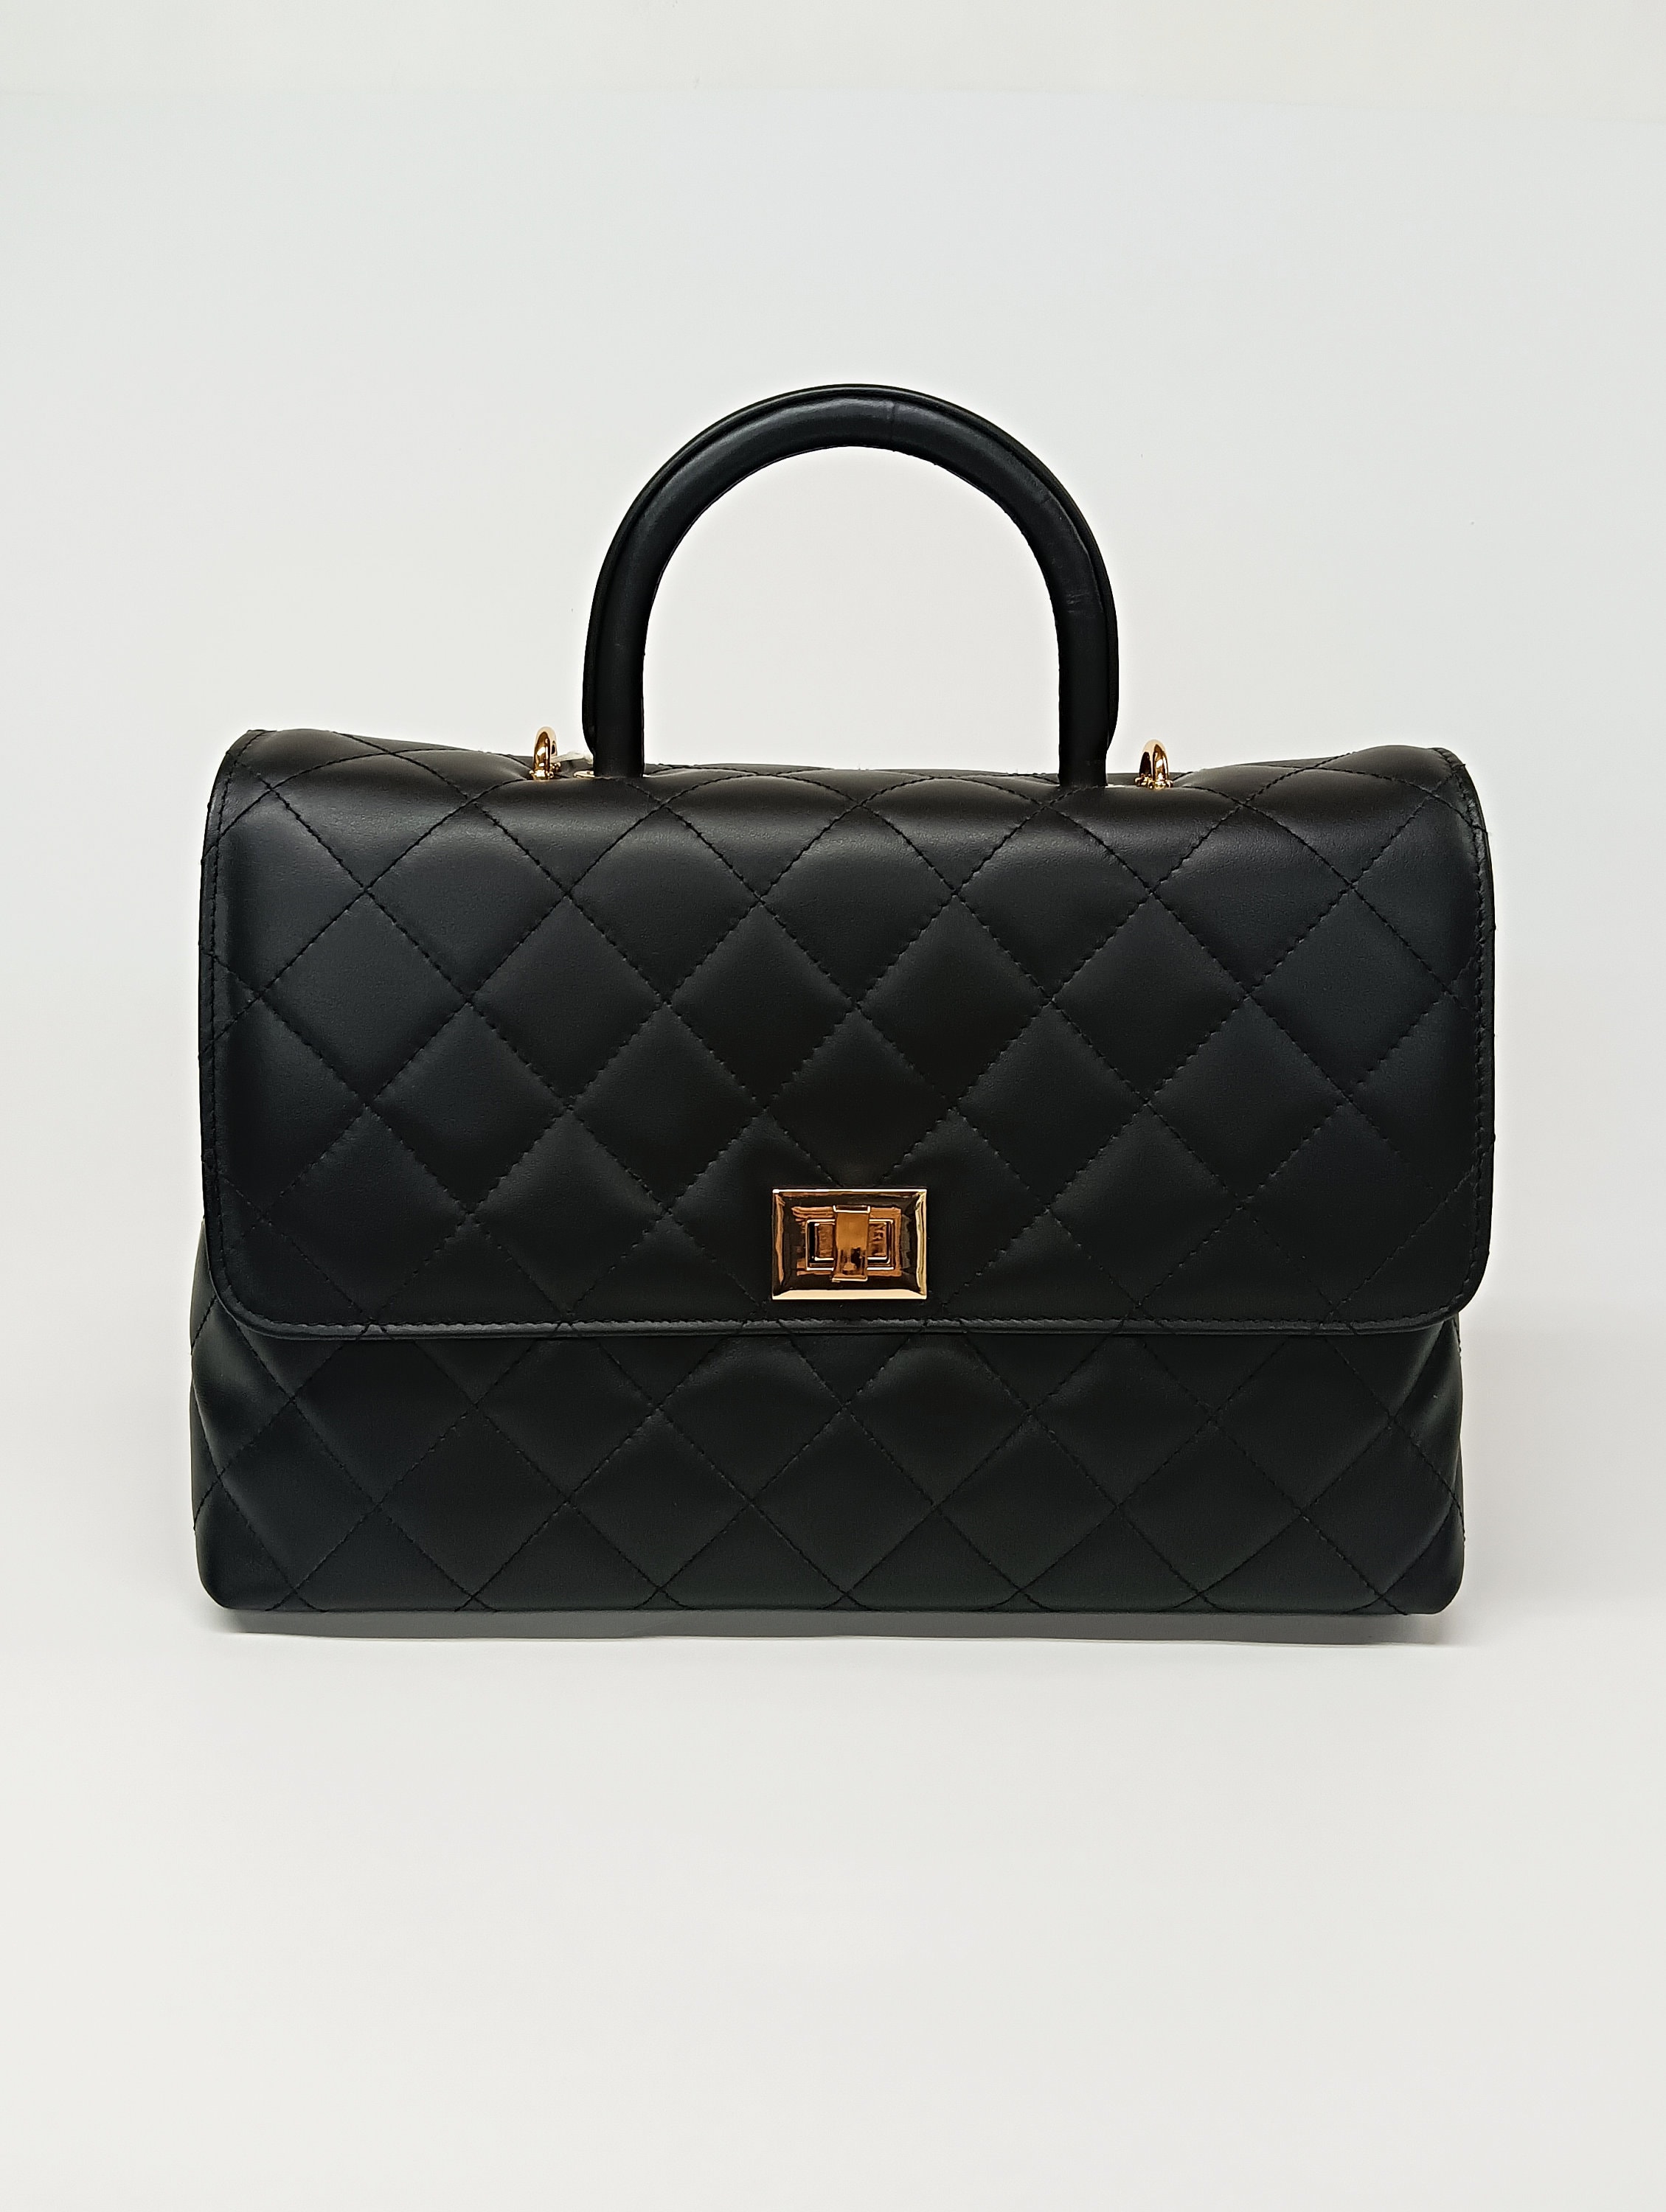 Which would you have chosen? Regret purchasing lambskin mini top handle : r/ chanel